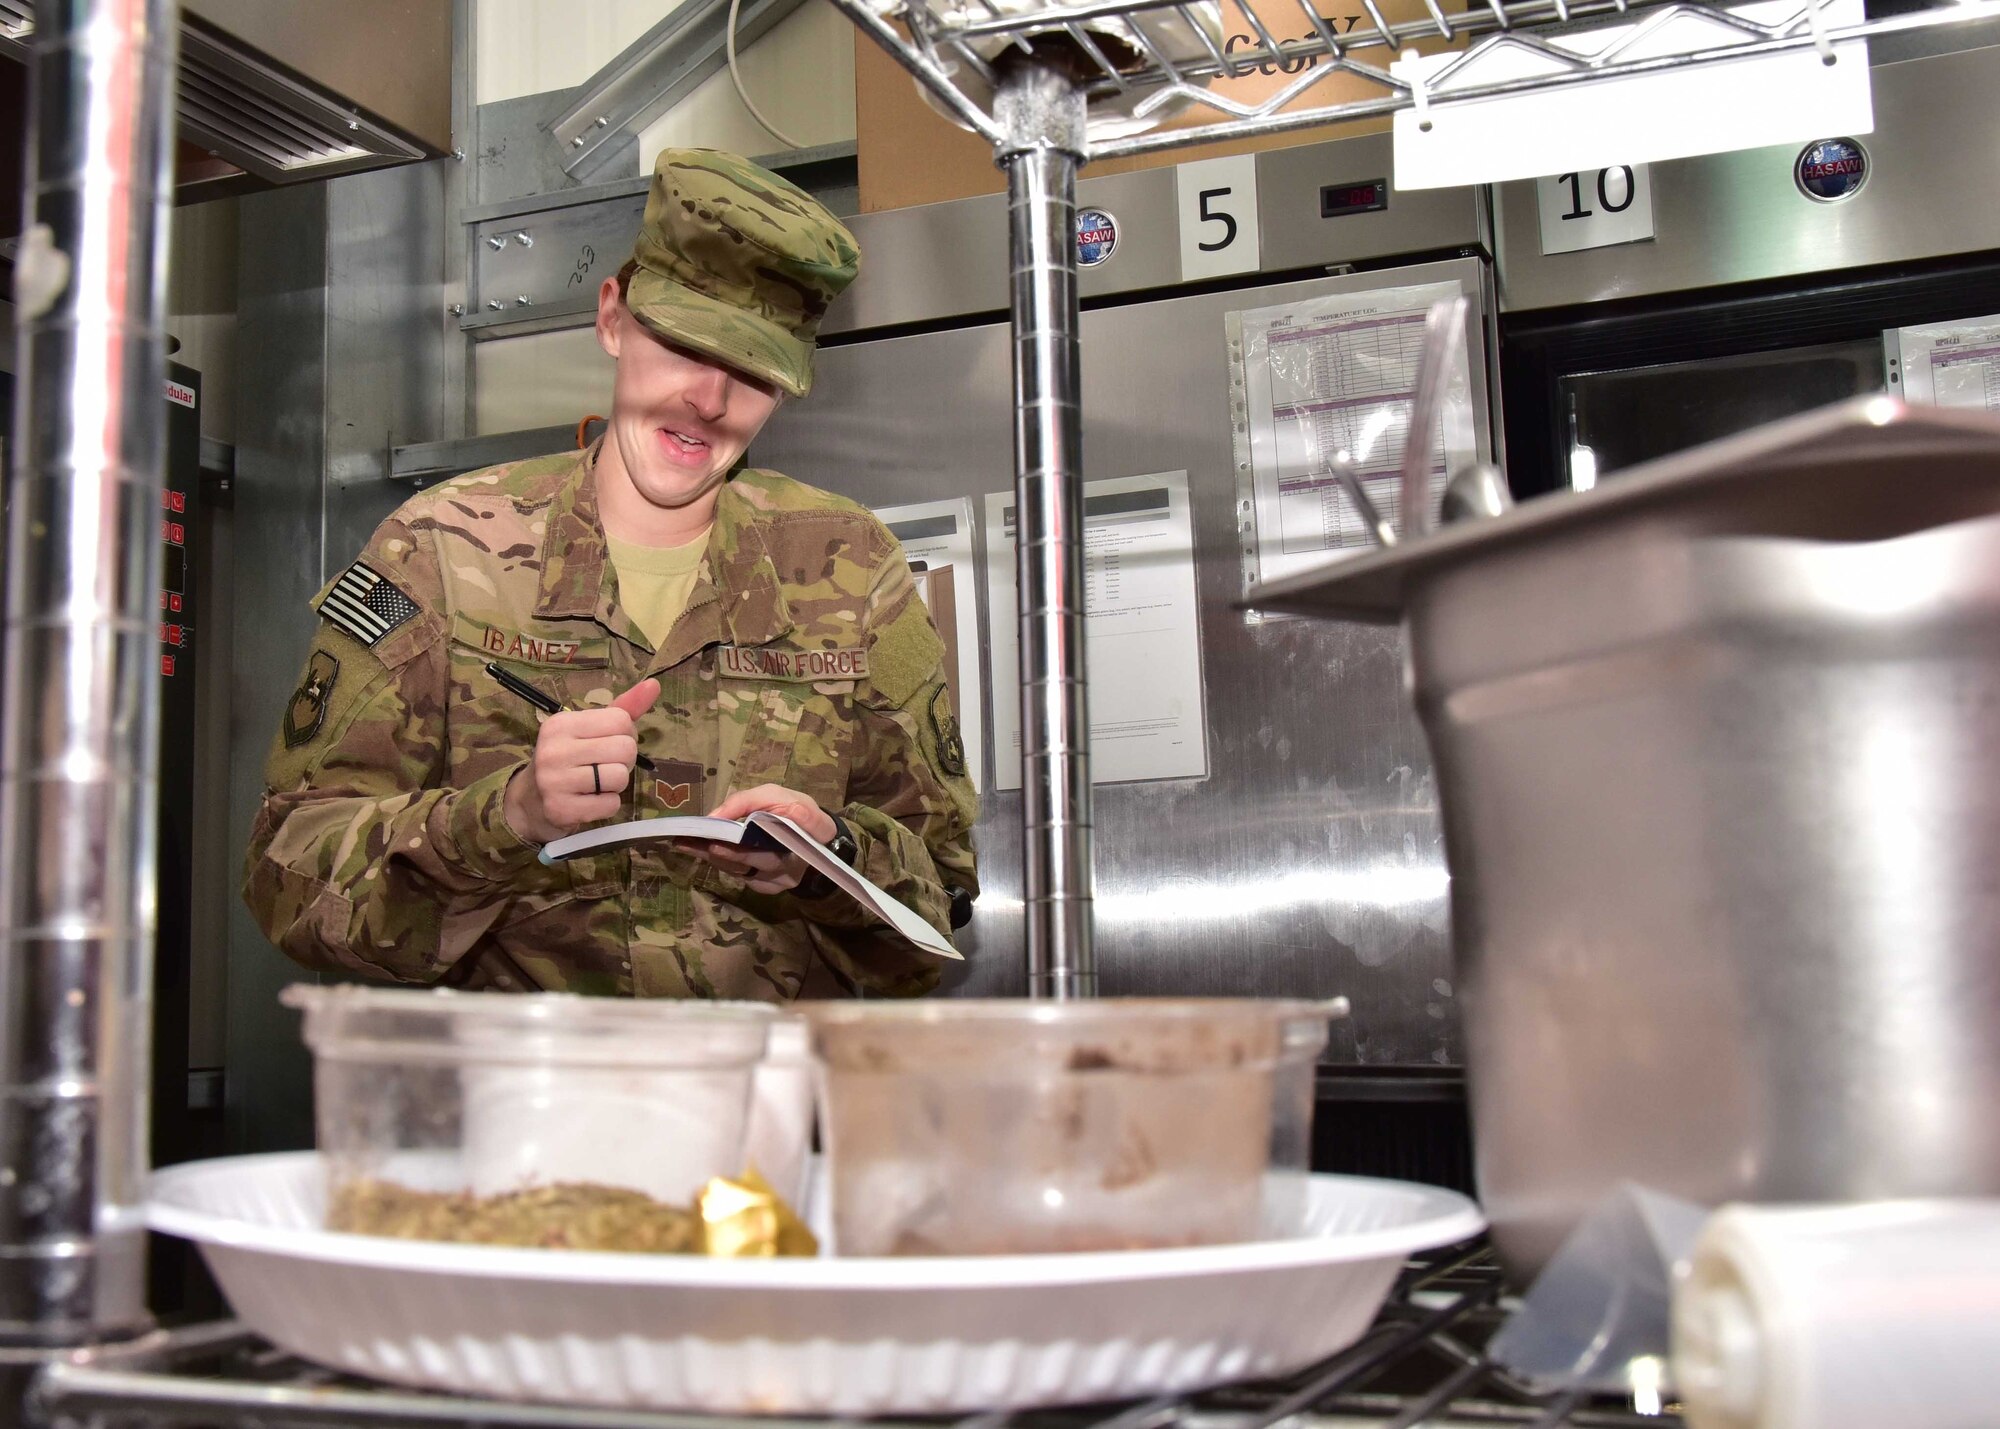 Maj. Jessica McGlade, 386th EMDG public health chief, and her team work diligently to ensure all food and food facilities at their location are safe. They also check to see if food handlers are knowledgeable about the food they are handling. Assessing the risks associated with productions, transportation, storage, preparation, and serving of food is a daily occurrence for them.